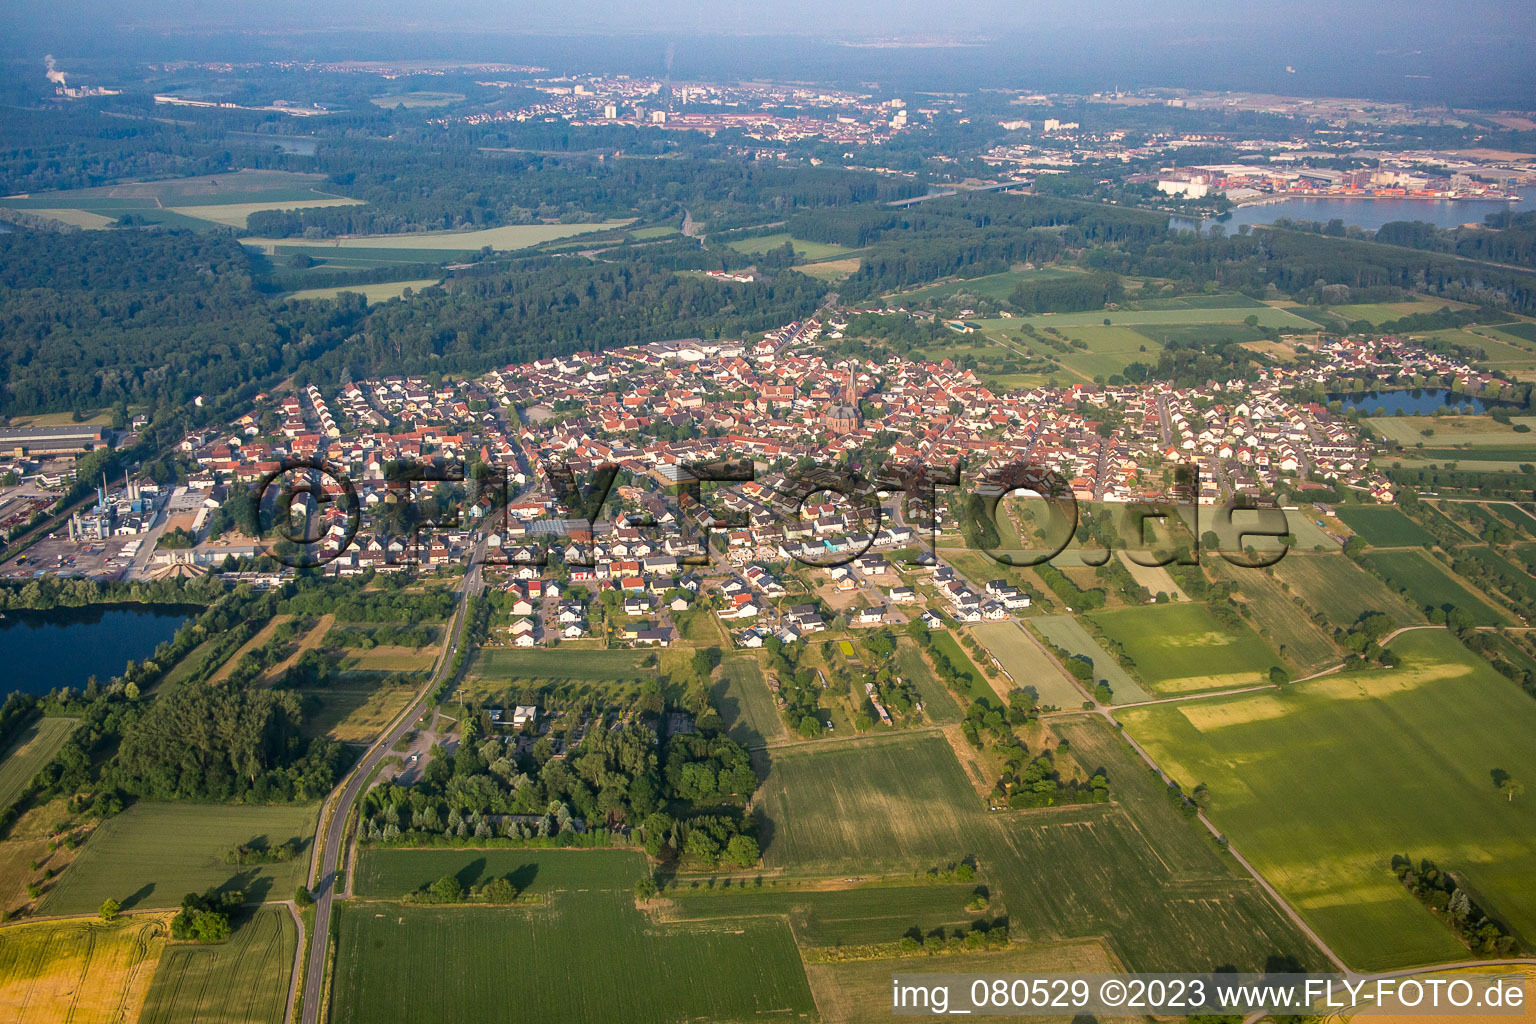 From the northeast in the district Rheinsheim in Philippsburg in the state Baden-Wuerttemberg, Germany